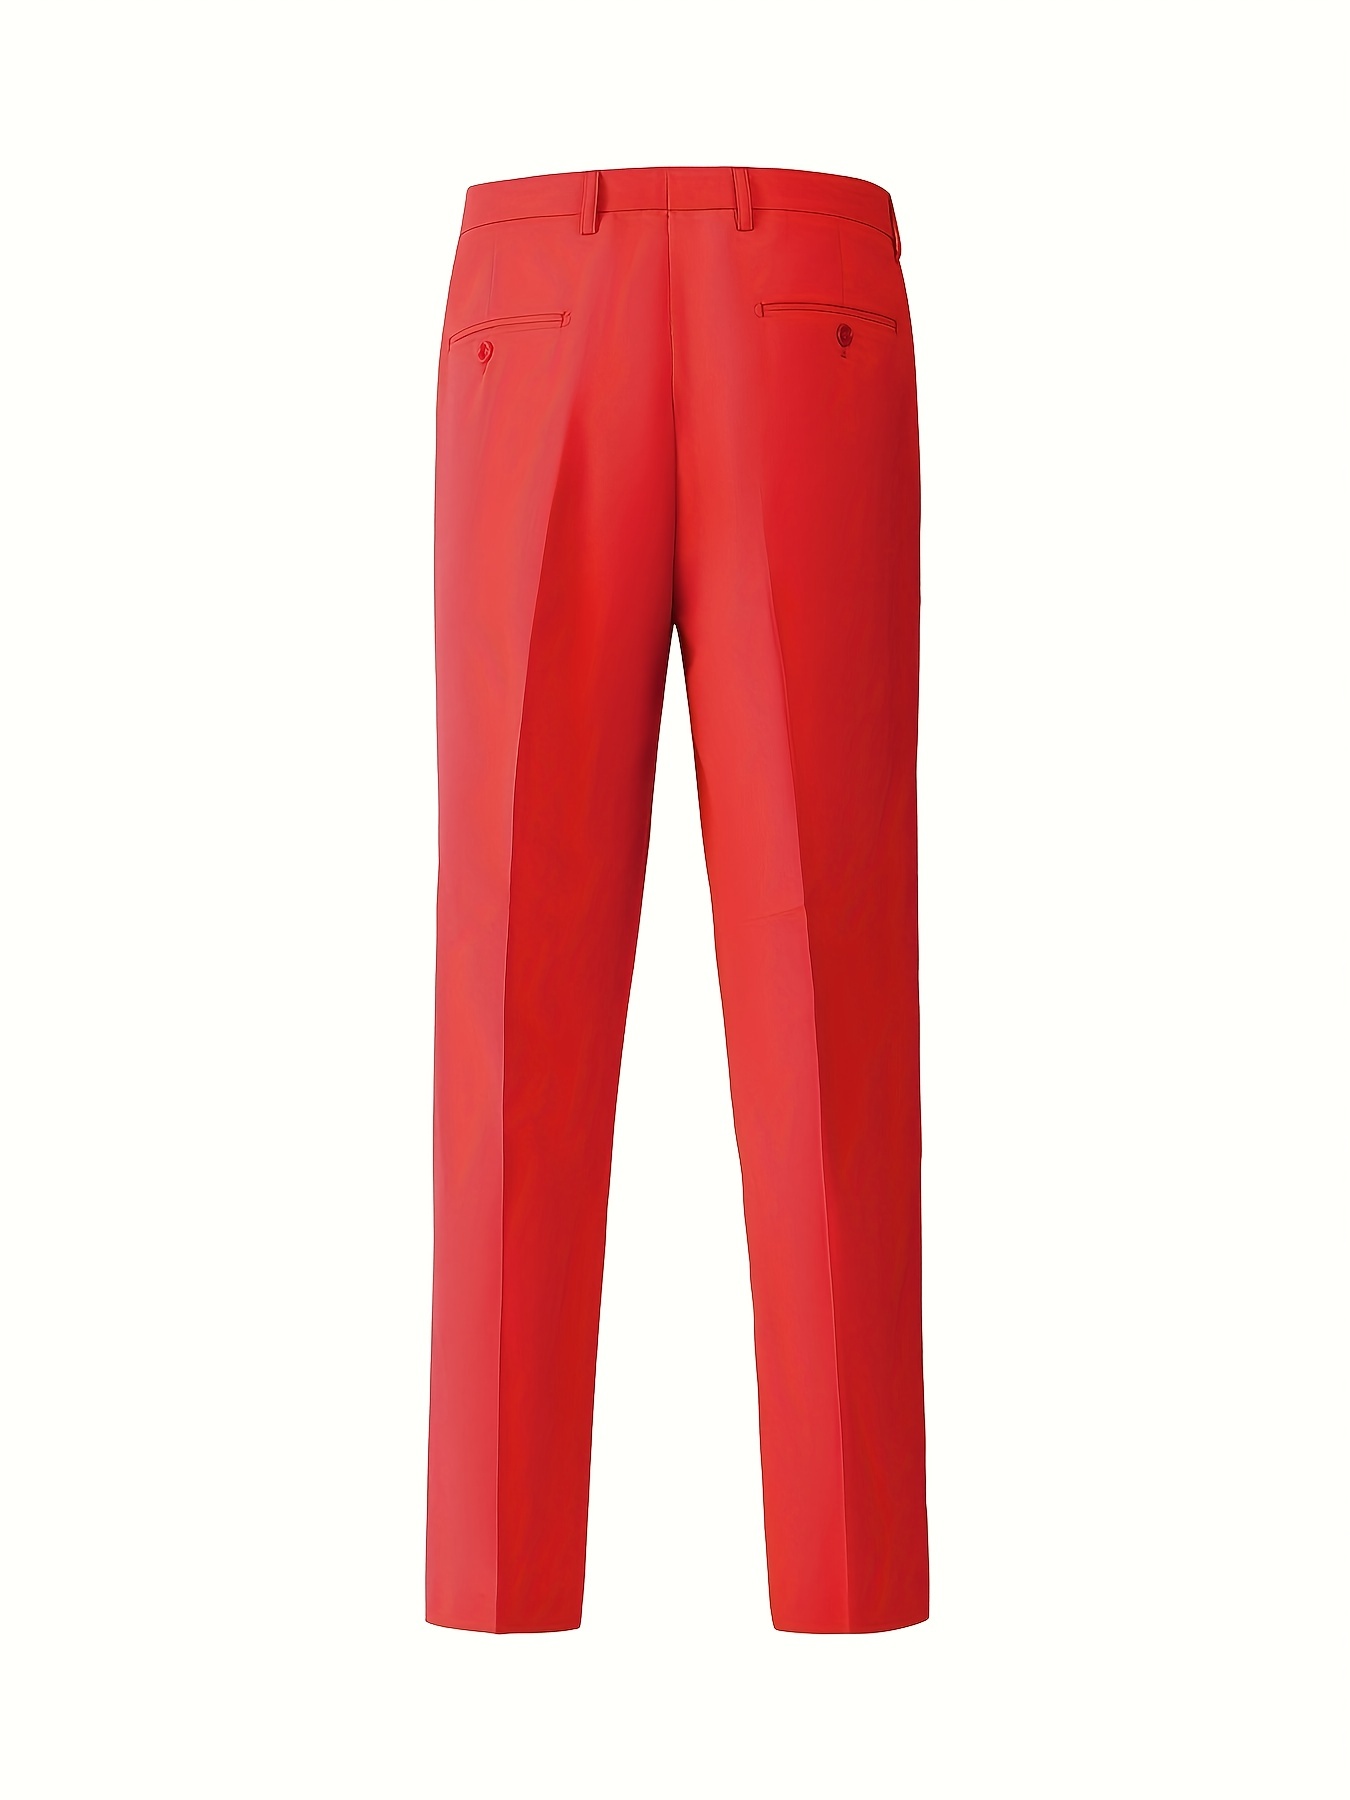 Red suit with golden buttons: Jacket, Vest and Pants - C3026